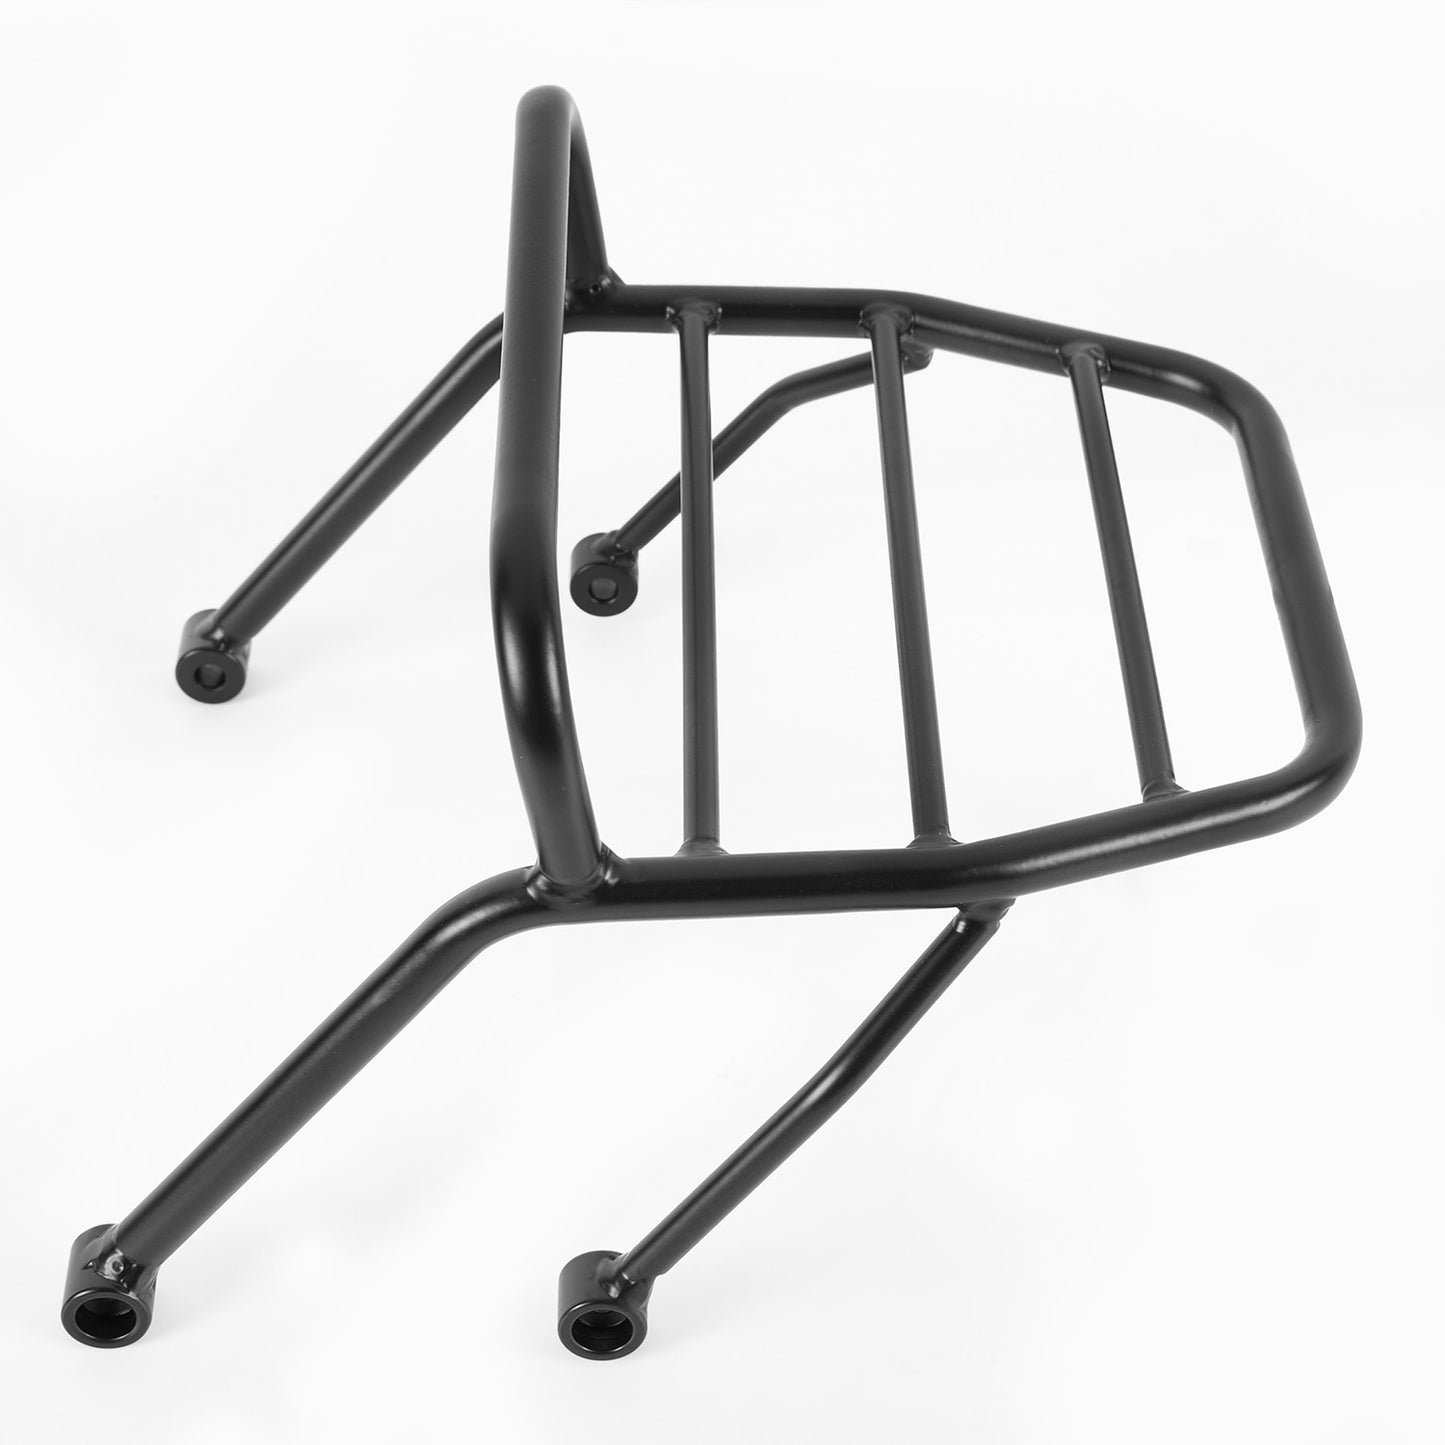 Wolfline CT125 Front Driver Shelf  Luggage Rack for Honda Hunter Cub CT 125 2020 2021 2022 2023 Motorcycle Bracket Accessories